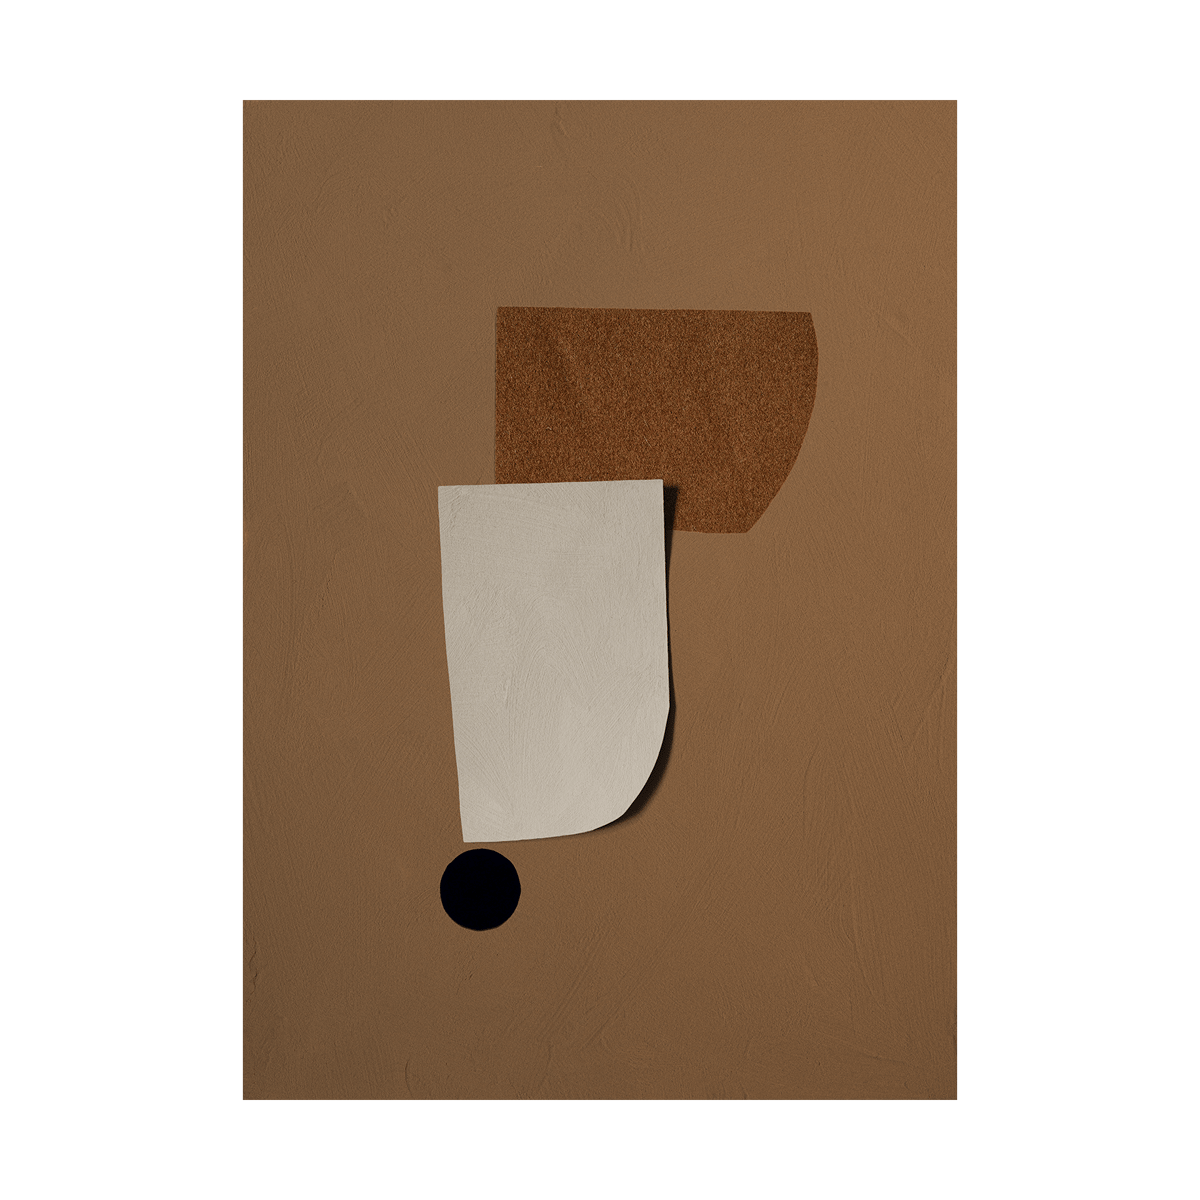 Paper Collective Tipping Point 02 plakat 70×100 cm